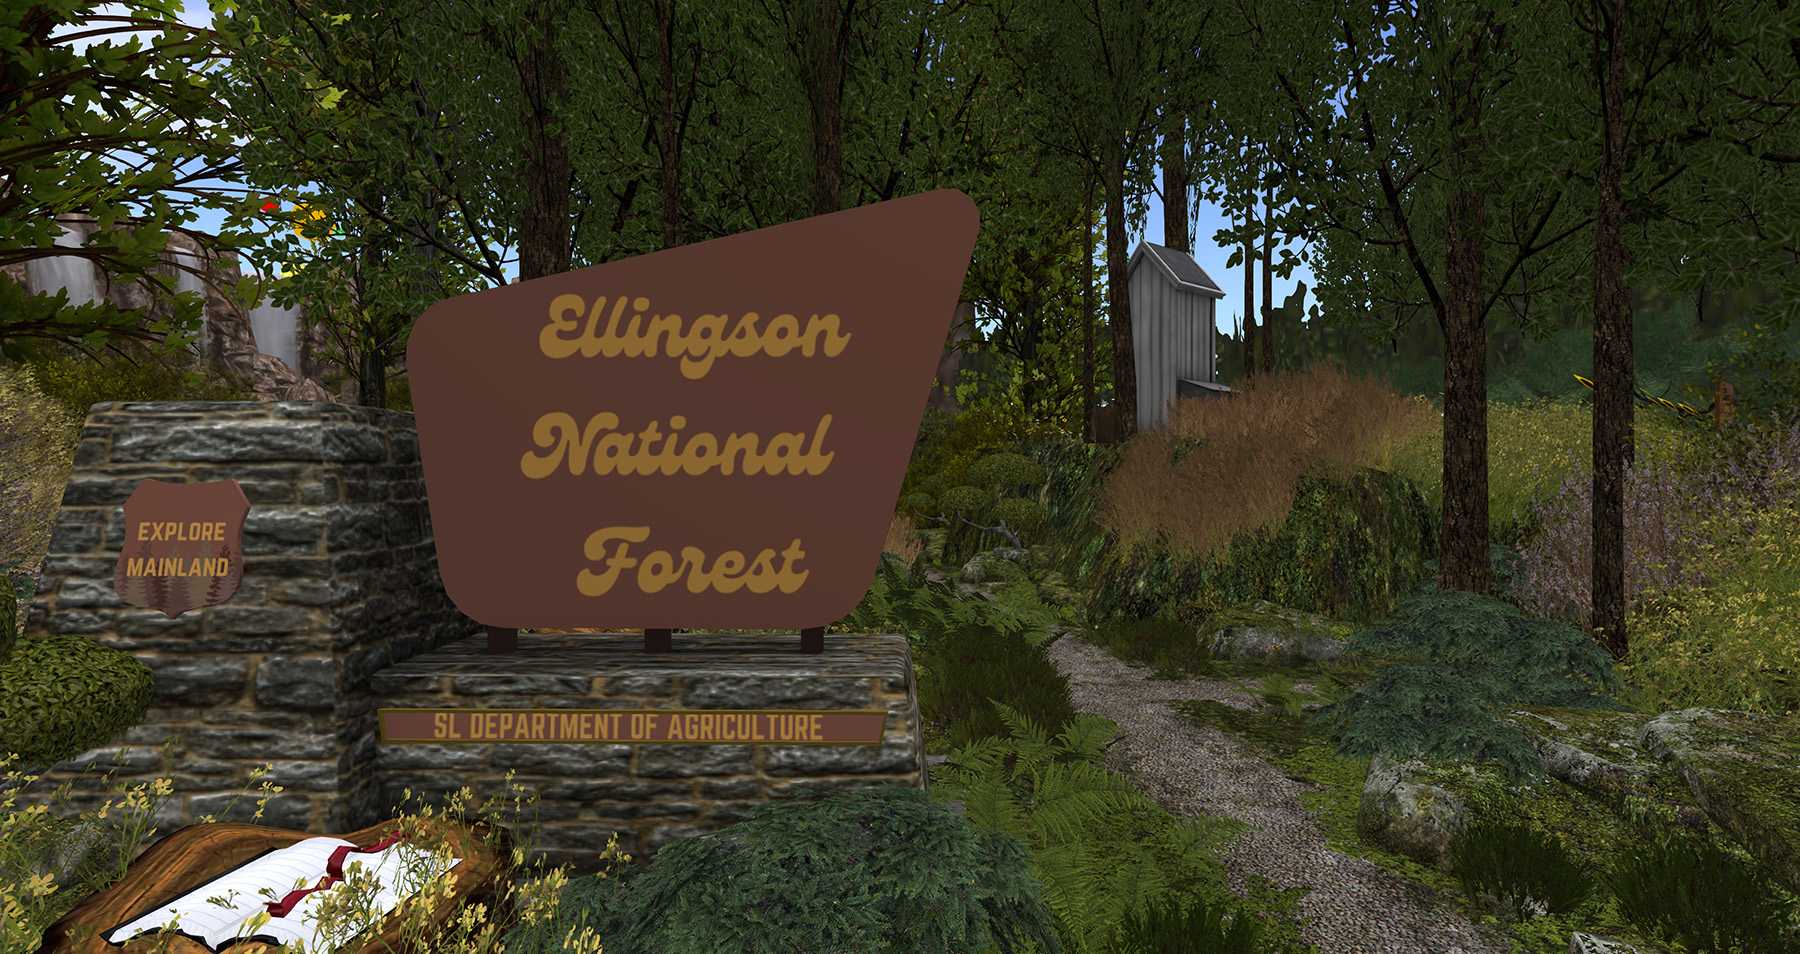 Ellingson National Forest: Are Virtual National Parks Coming to the Metaverse?